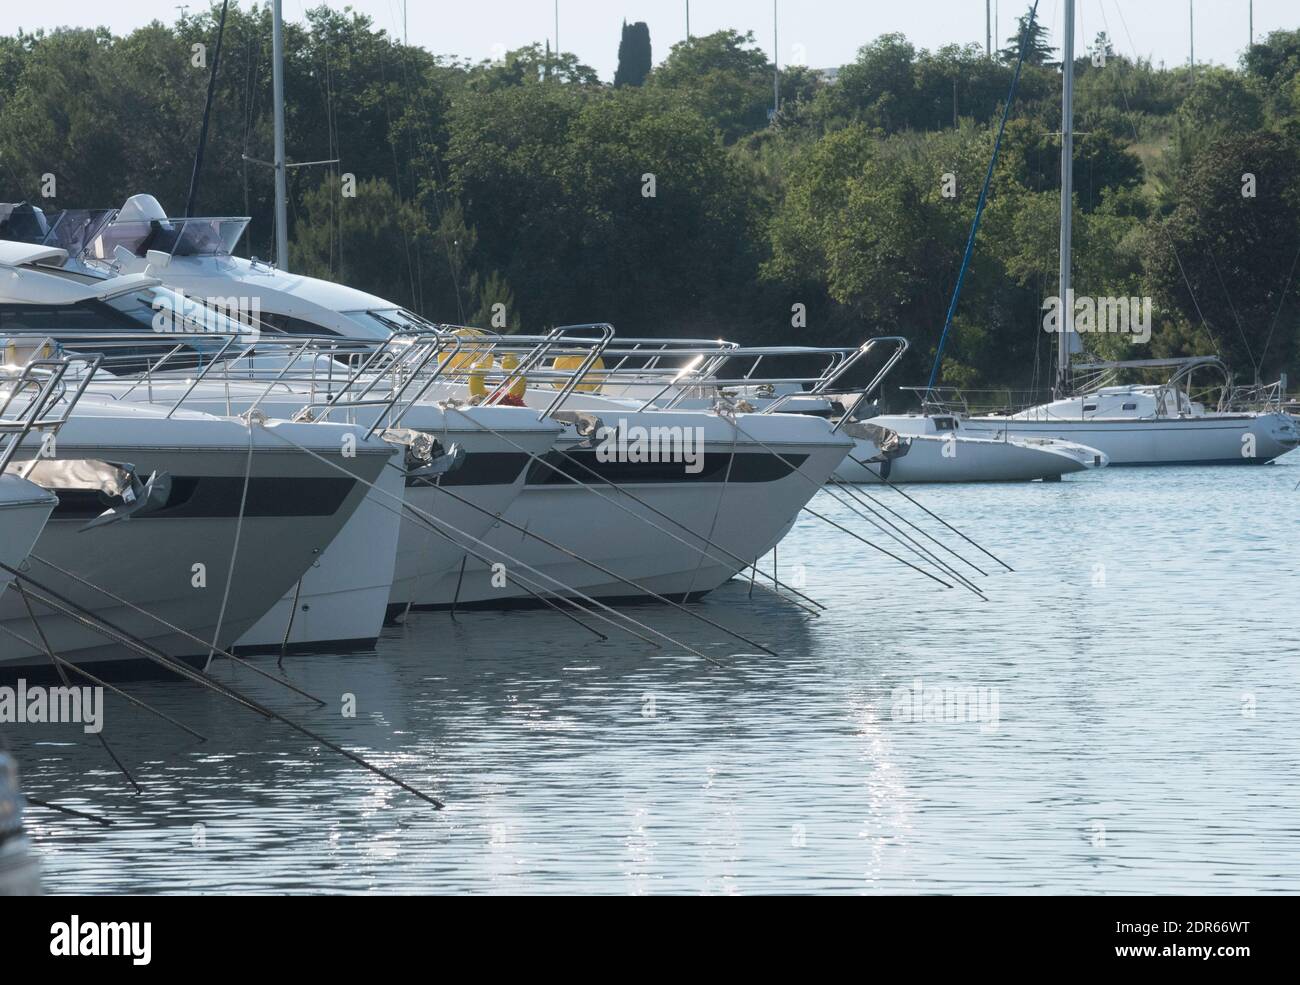 at a marina or yacht harbor, transportation and mobility in water Stock Photo